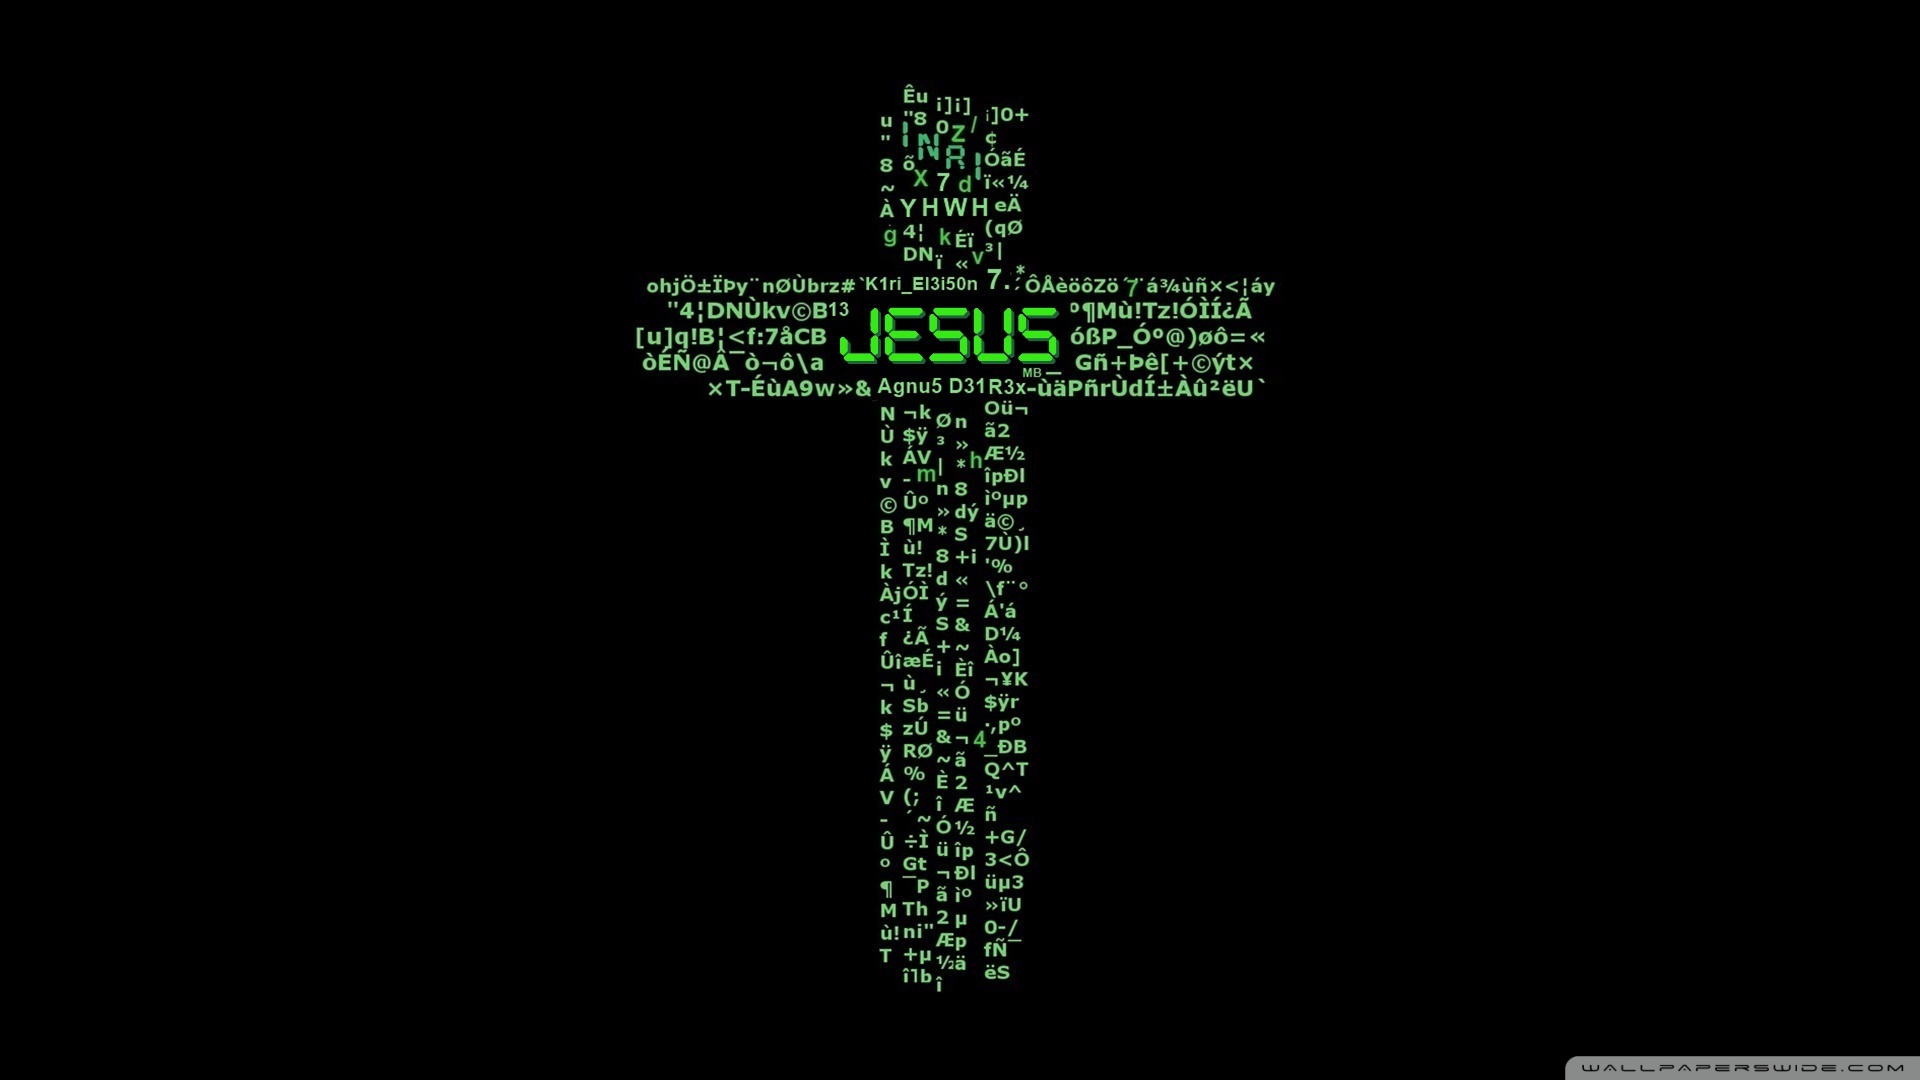 20 Best cross jesus wallpaper aesthetic You Can Save It For Free ...